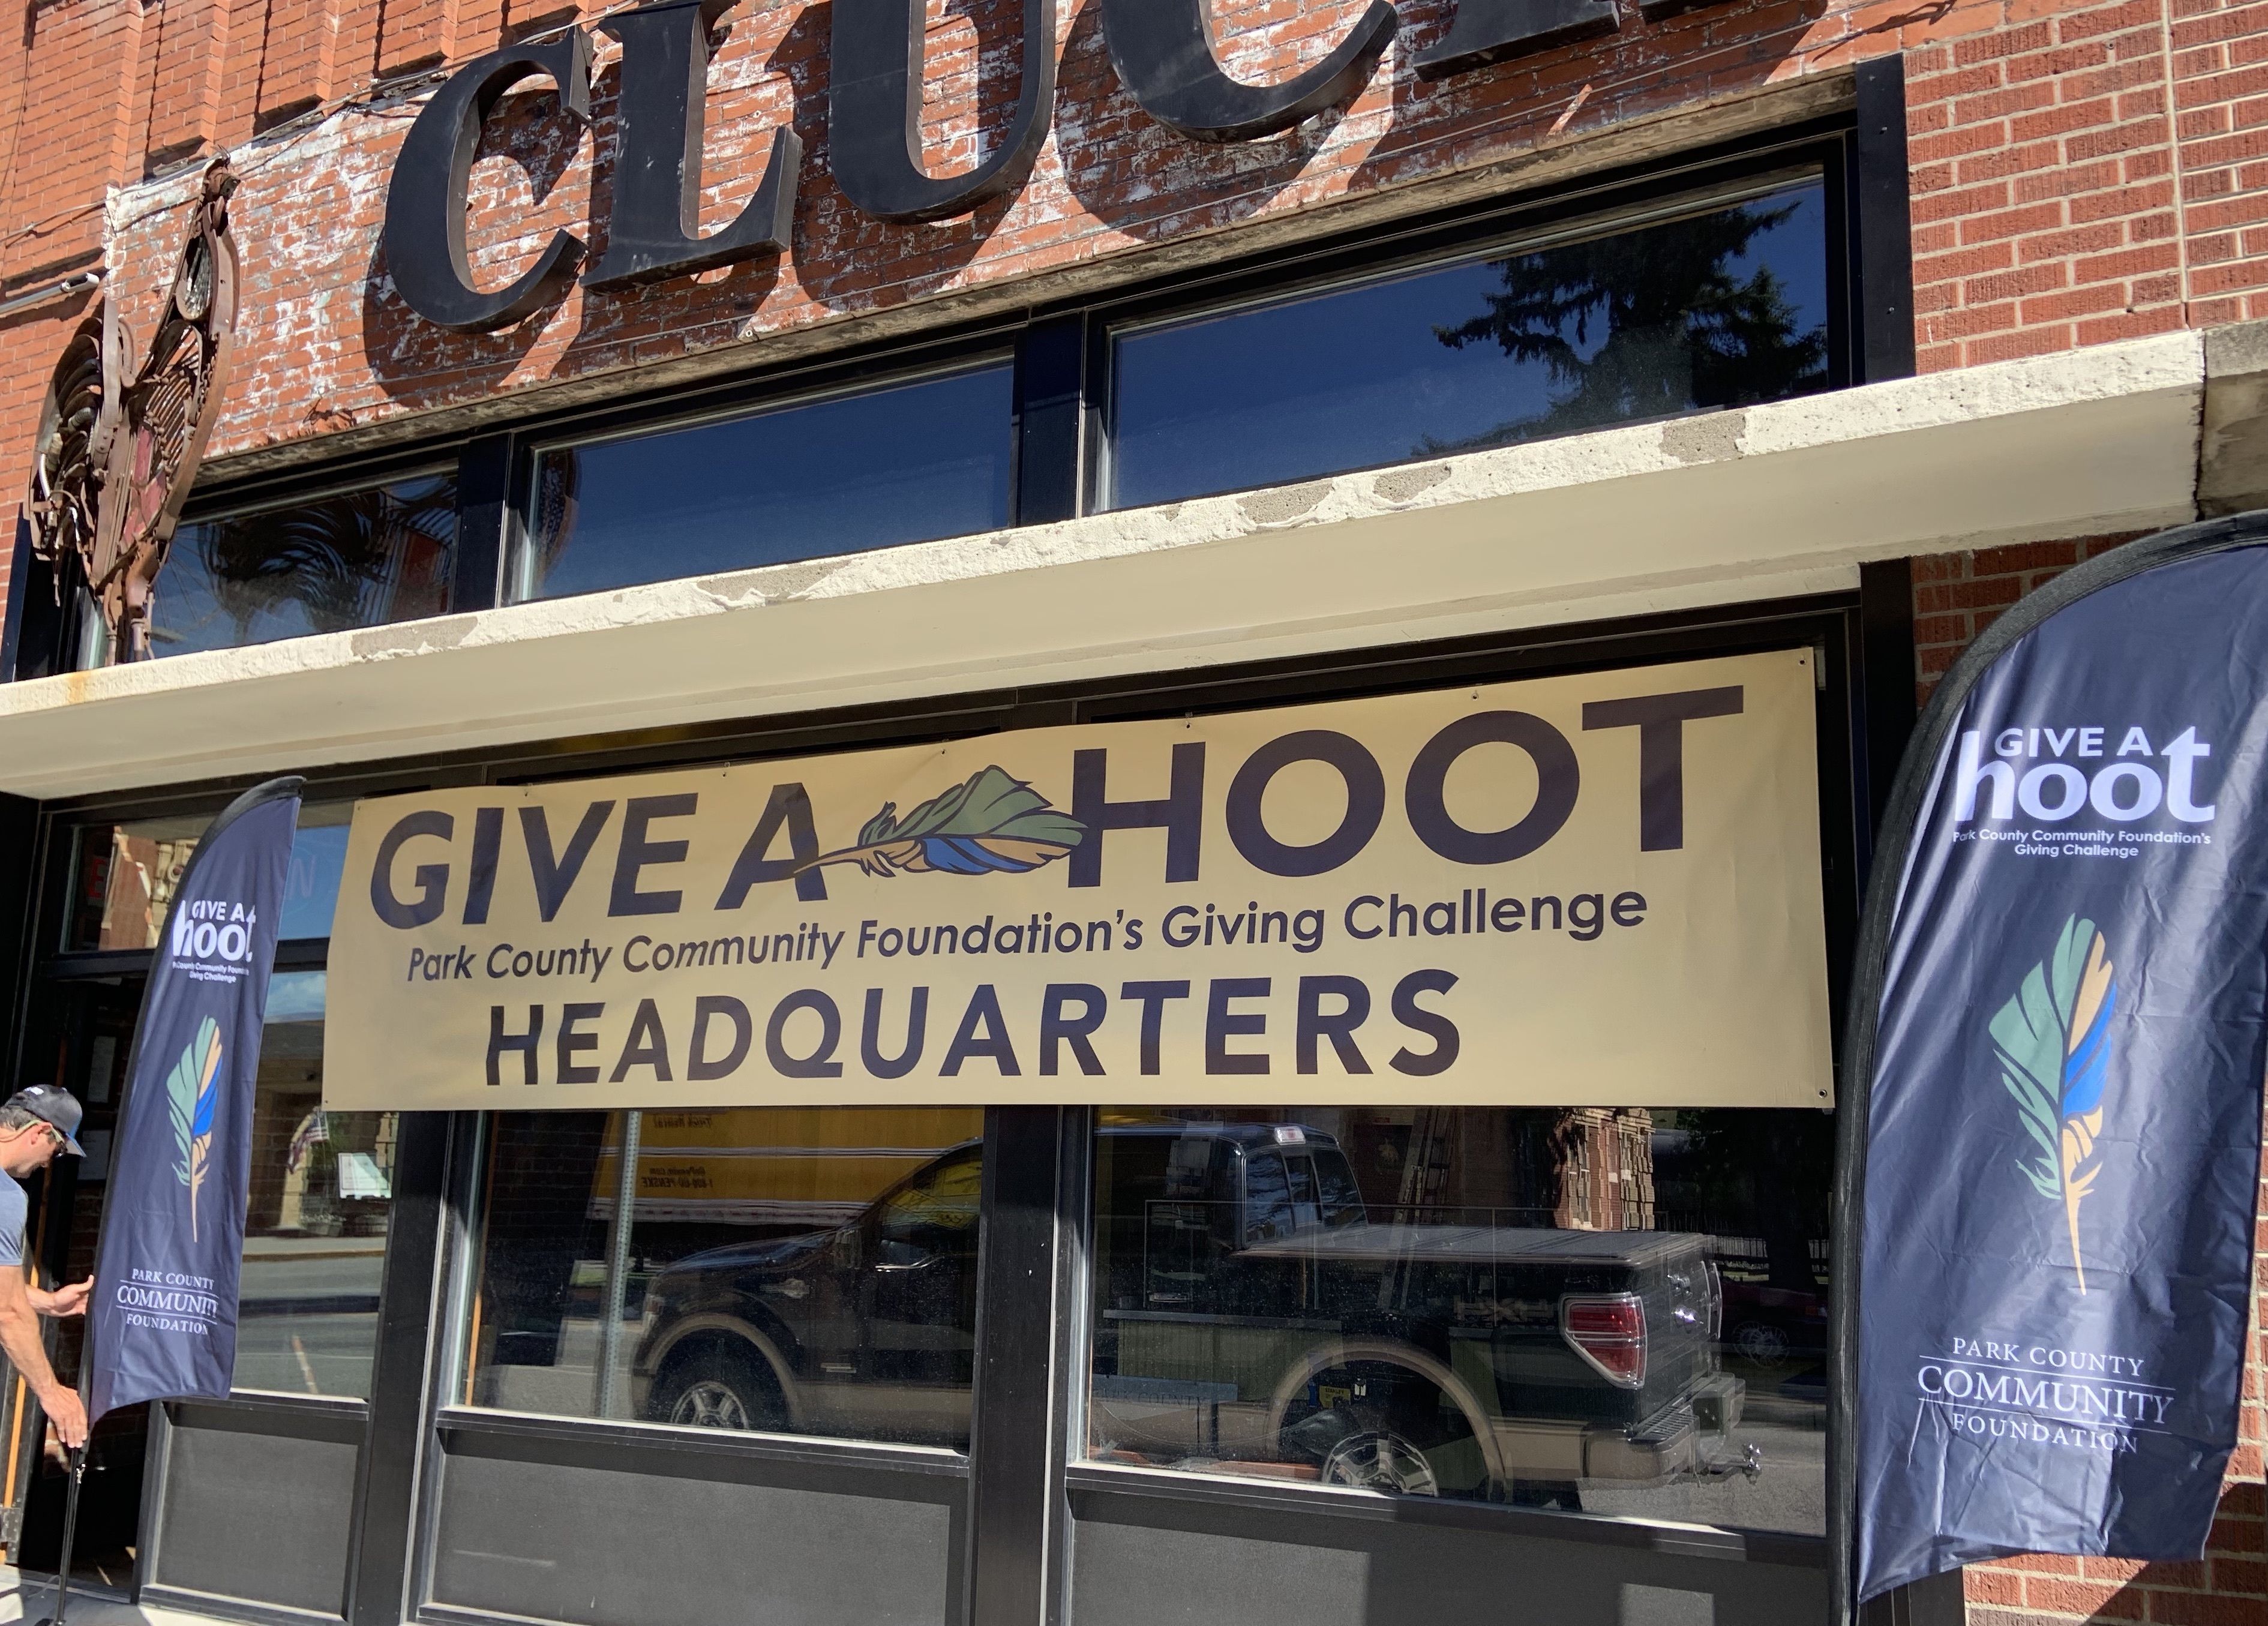 Visit our new office: Give a Hoot Headquarters!